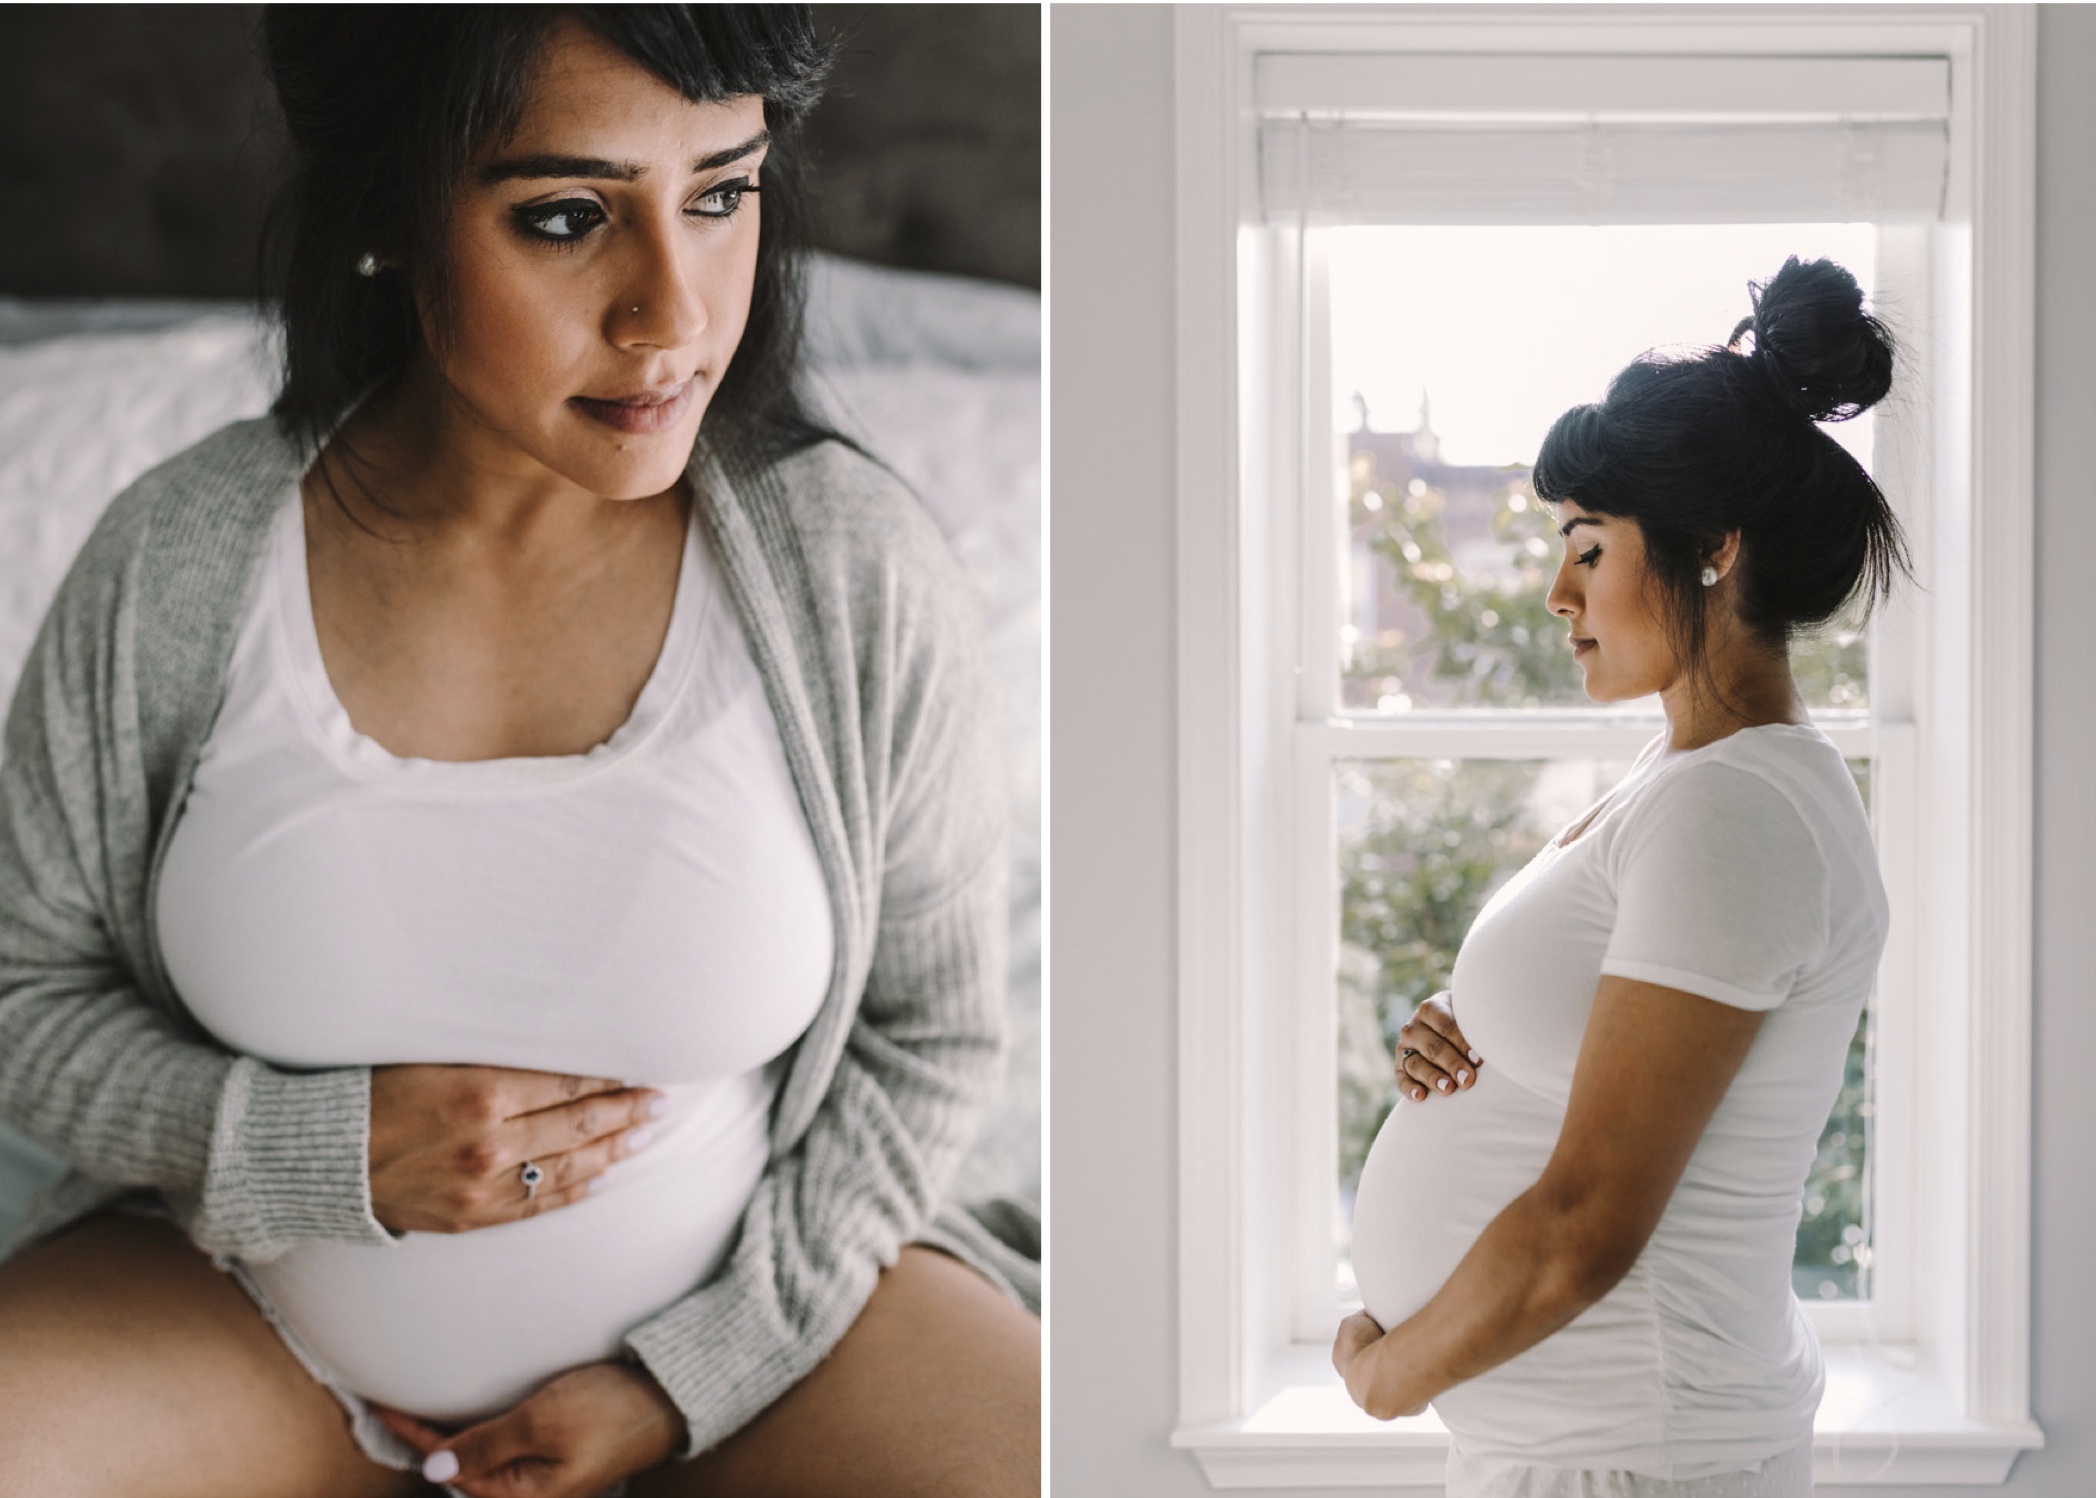 barbara o photography maternity at home session baltimore dc photographer.jpg